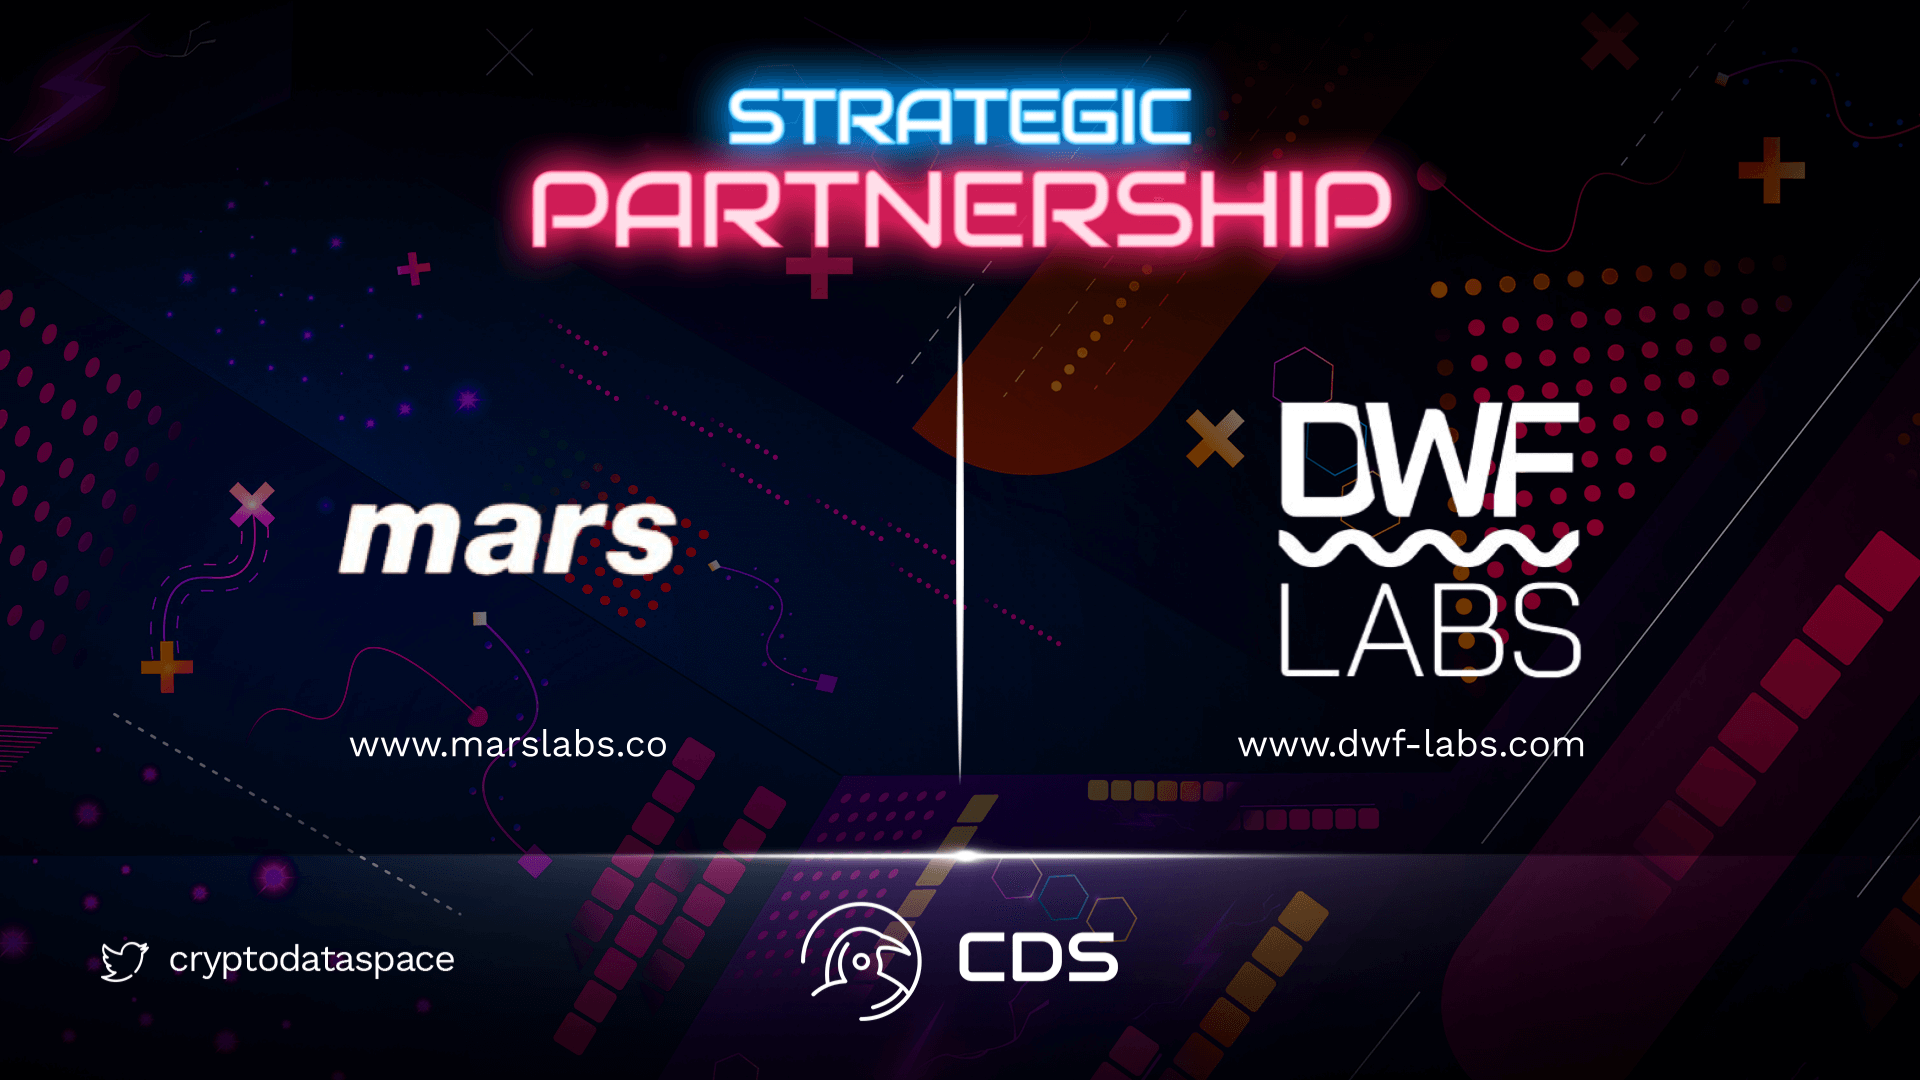 Mars Labs Announces Strategic Partnership with DWF Labs